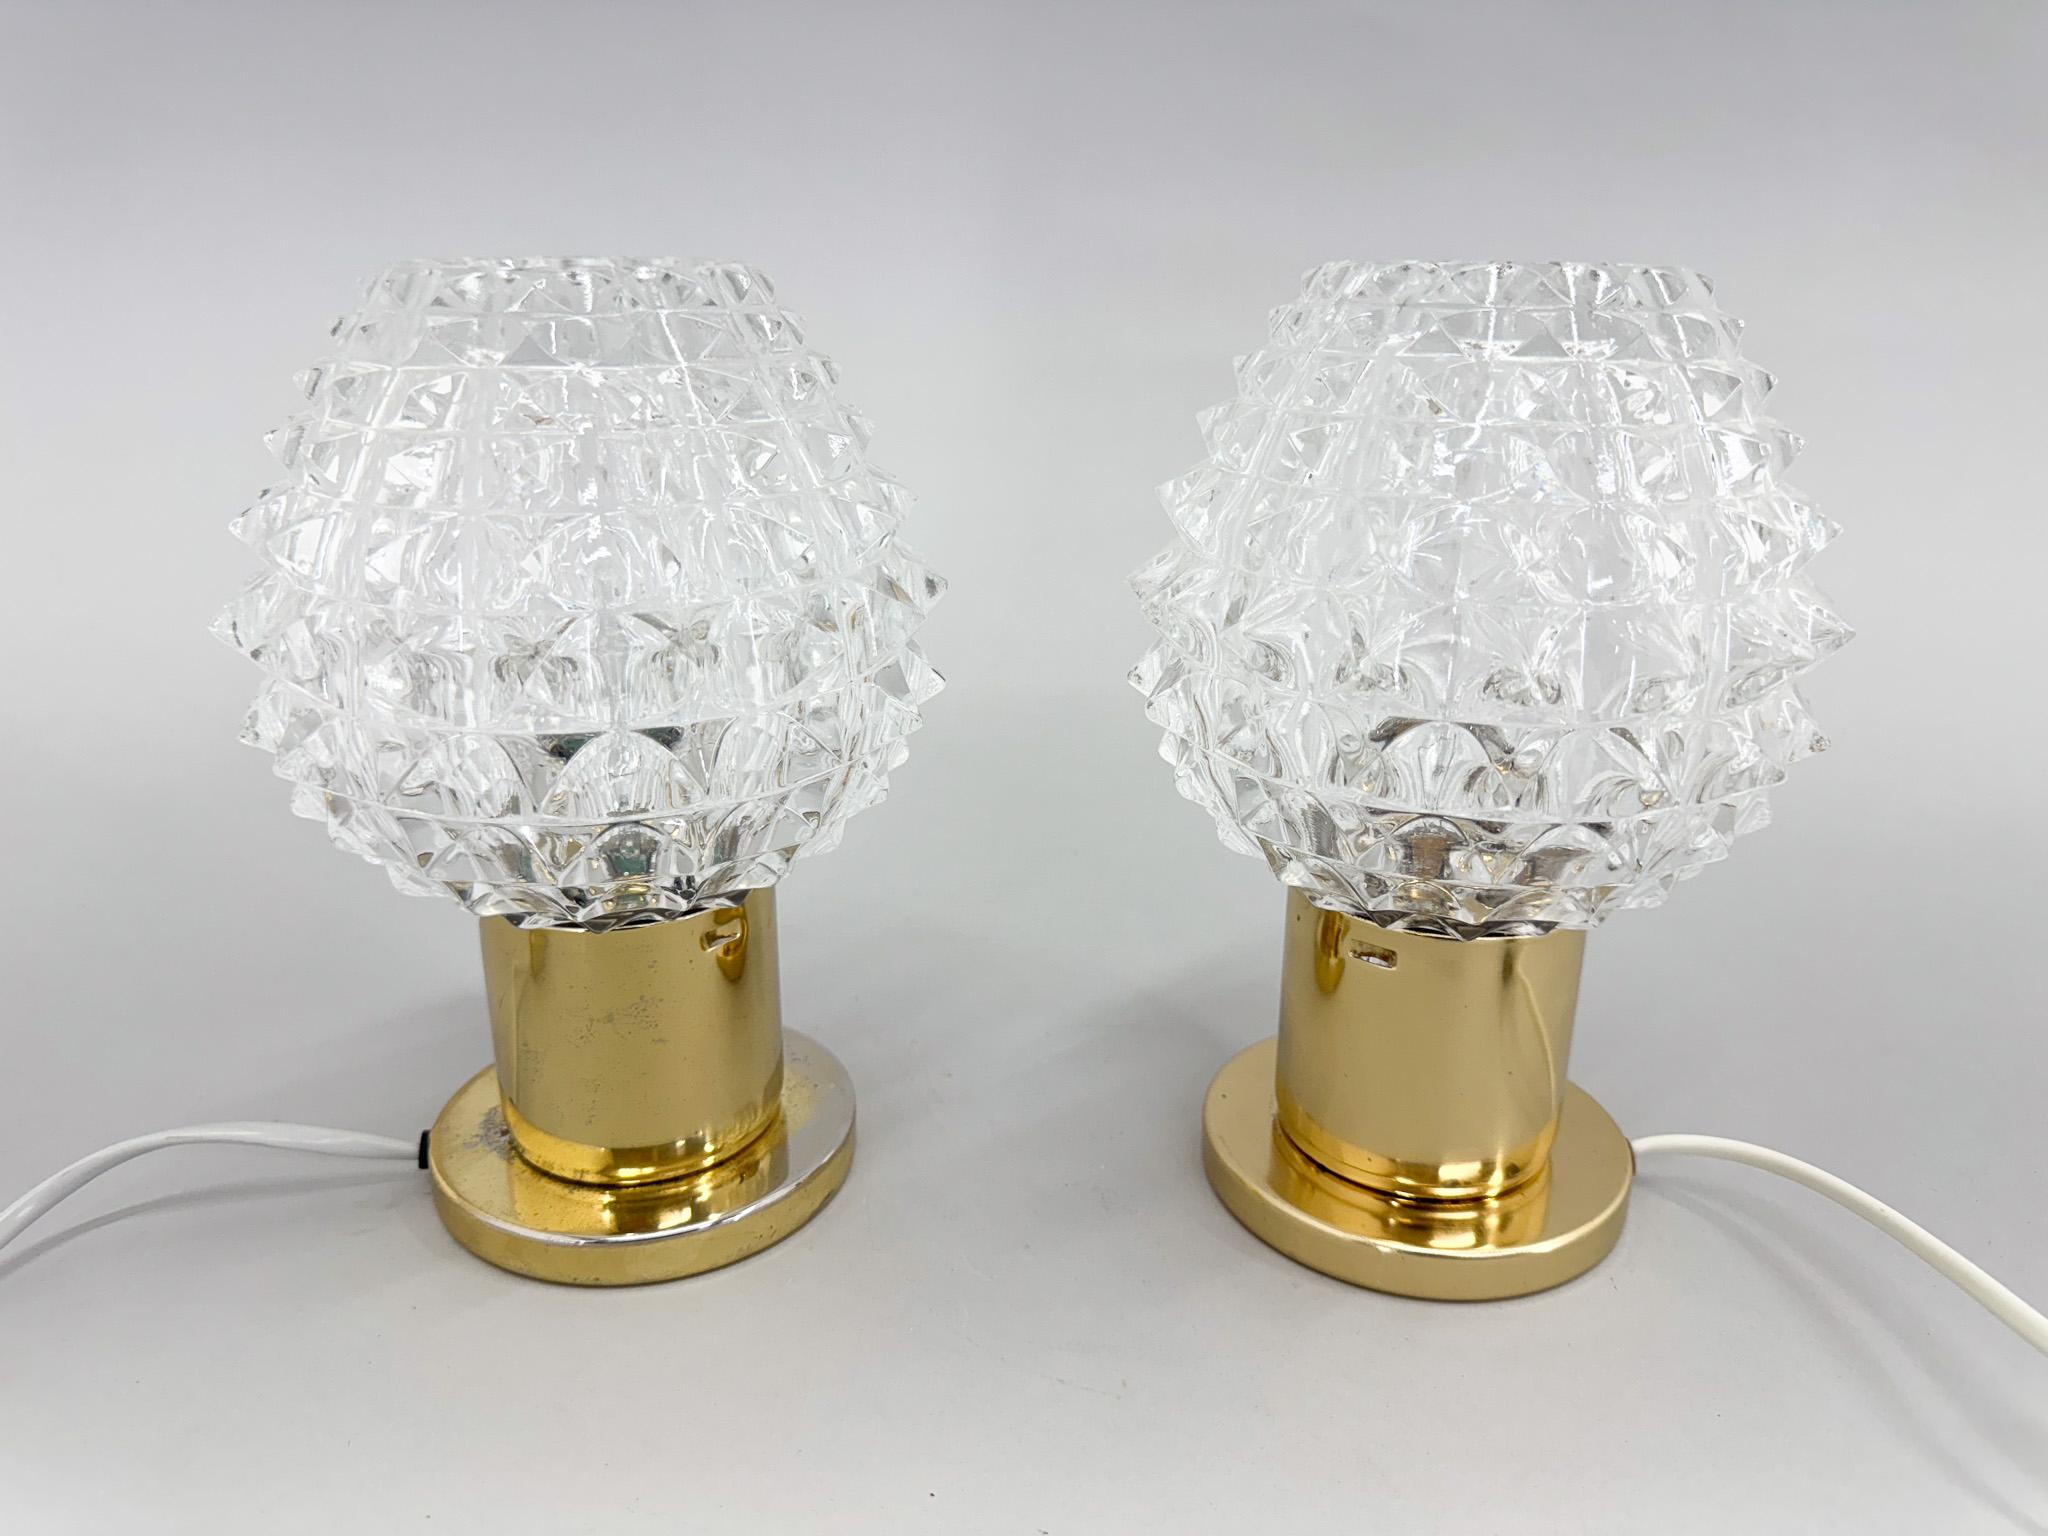 Pair of Brass and Glass Table Lamps by Kamenicky Senov, 1970s For Sale 3